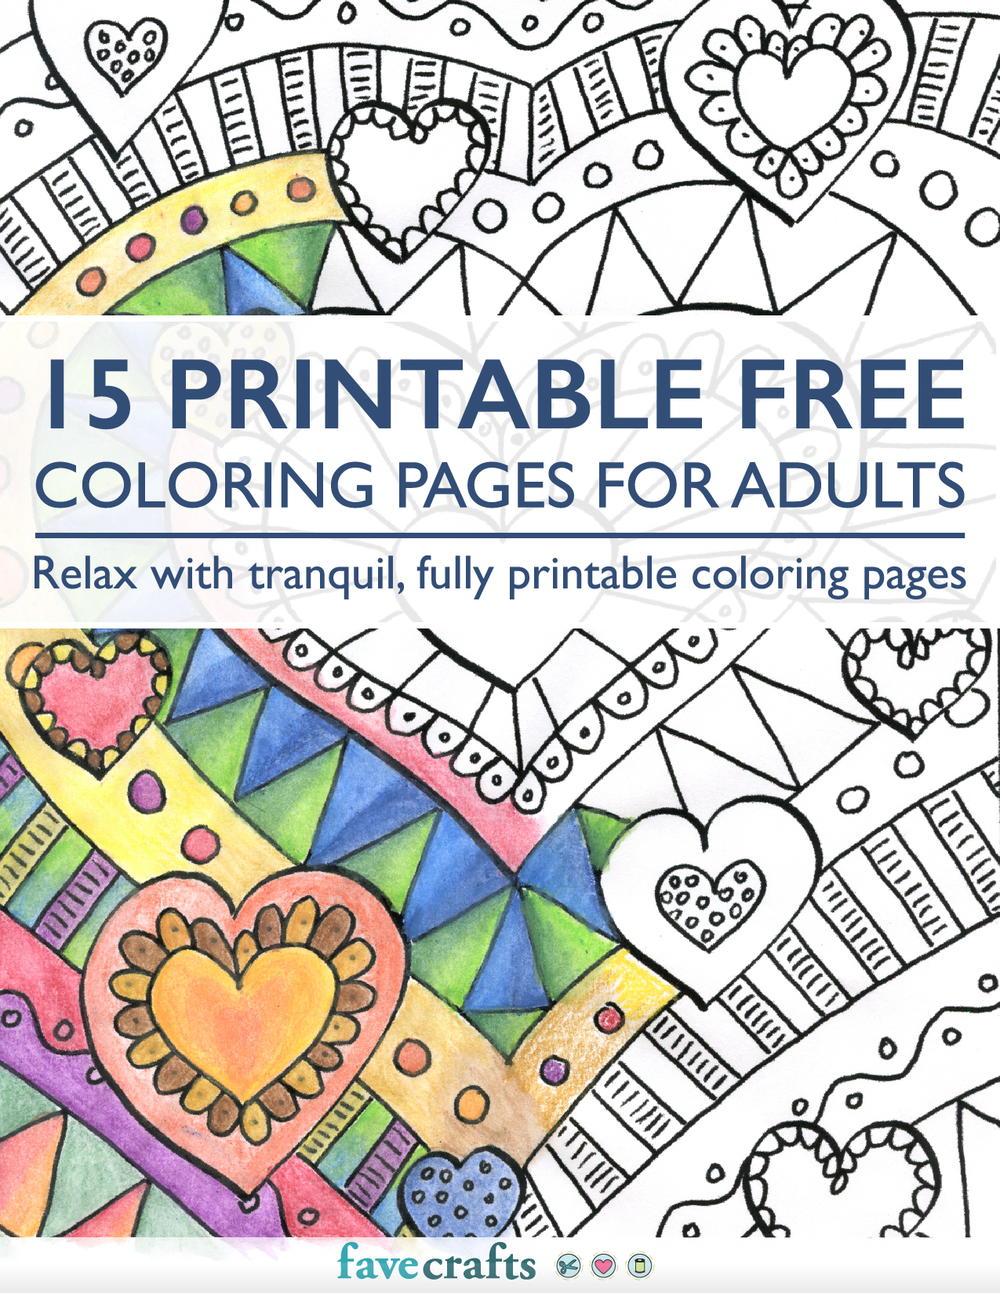 Download 15 Printable Free Coloring Pages for Adults [PDF ...